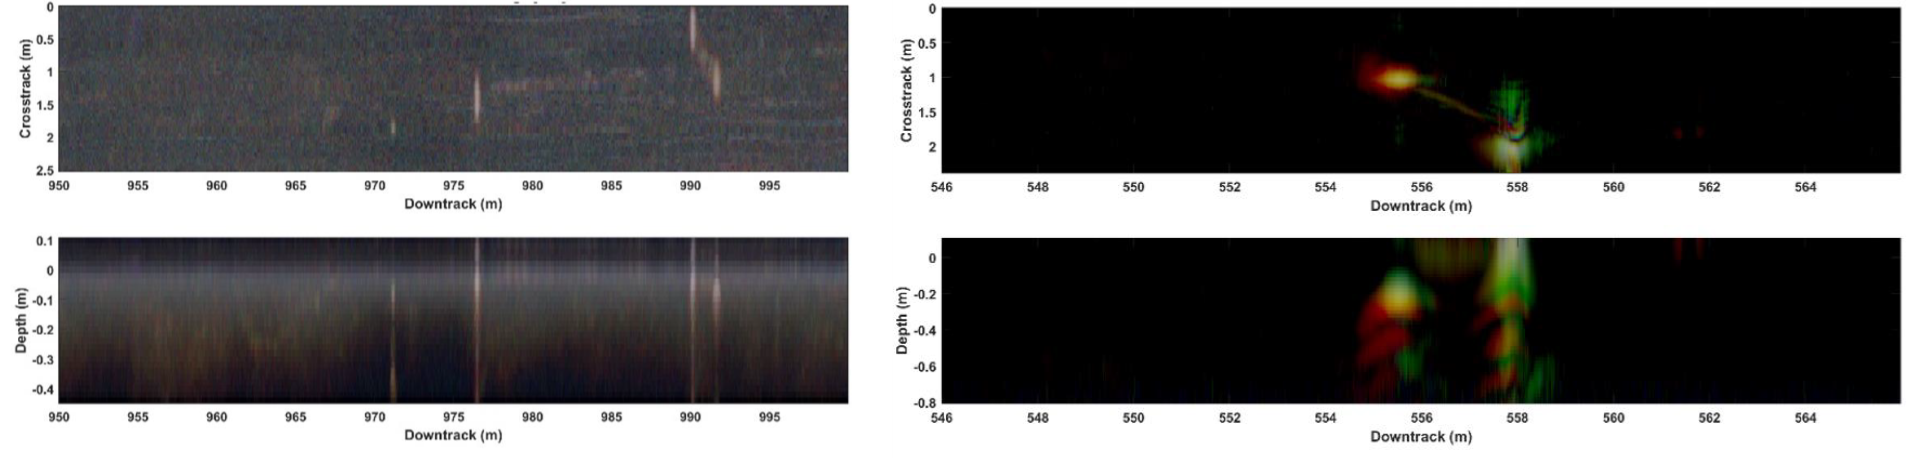 Left pair of images are examples of traditional GPR returns while right pair of images illustrate results from LLNL’s Triband Image Rendering